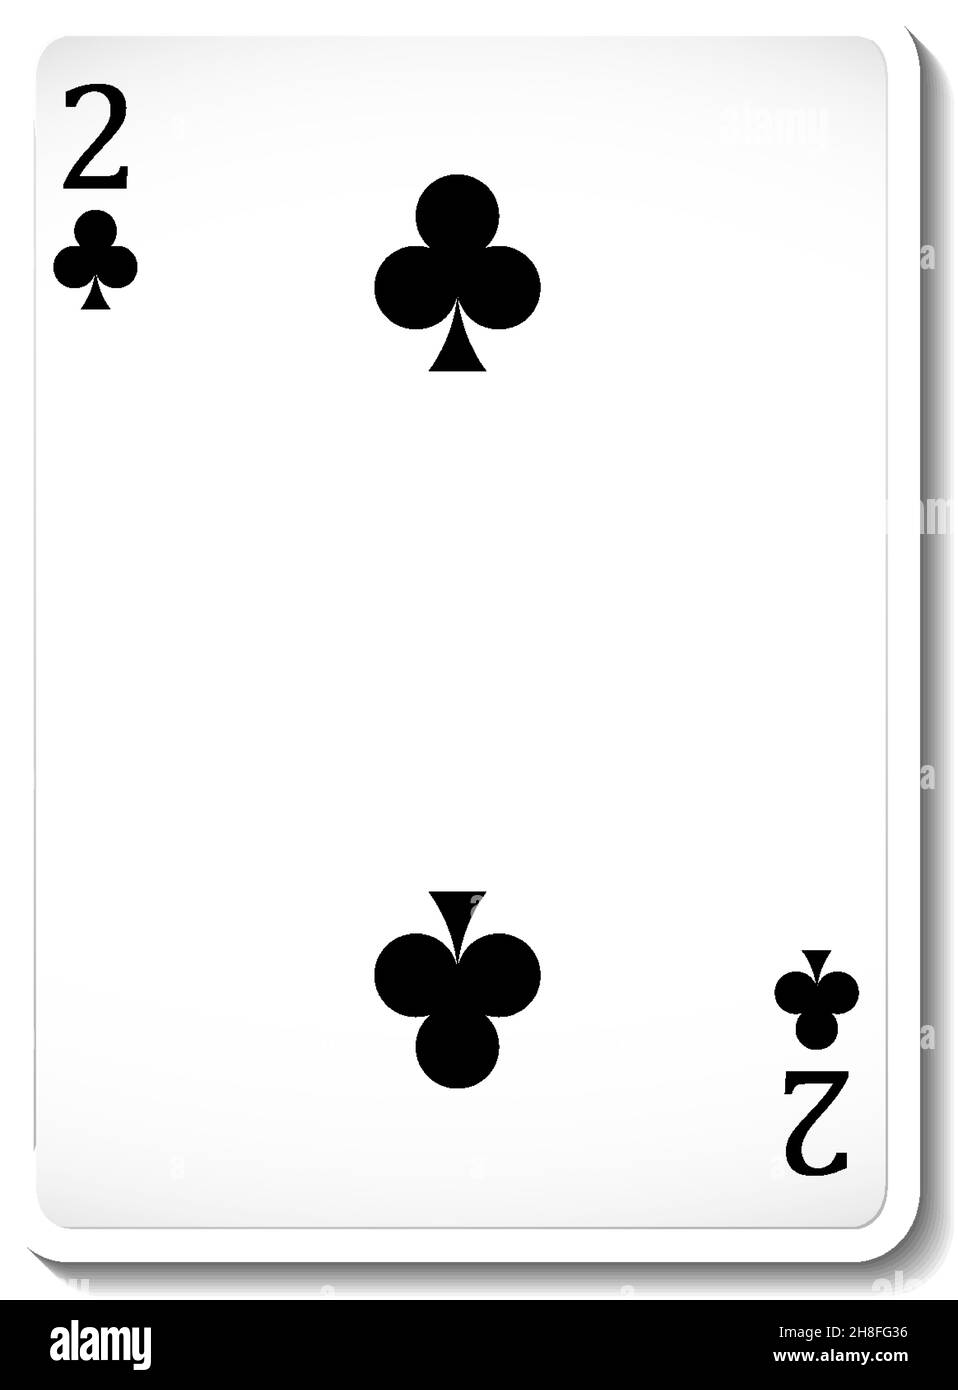 Two Of Clubs Playing Card Isolated Illustration Stock Vector Image